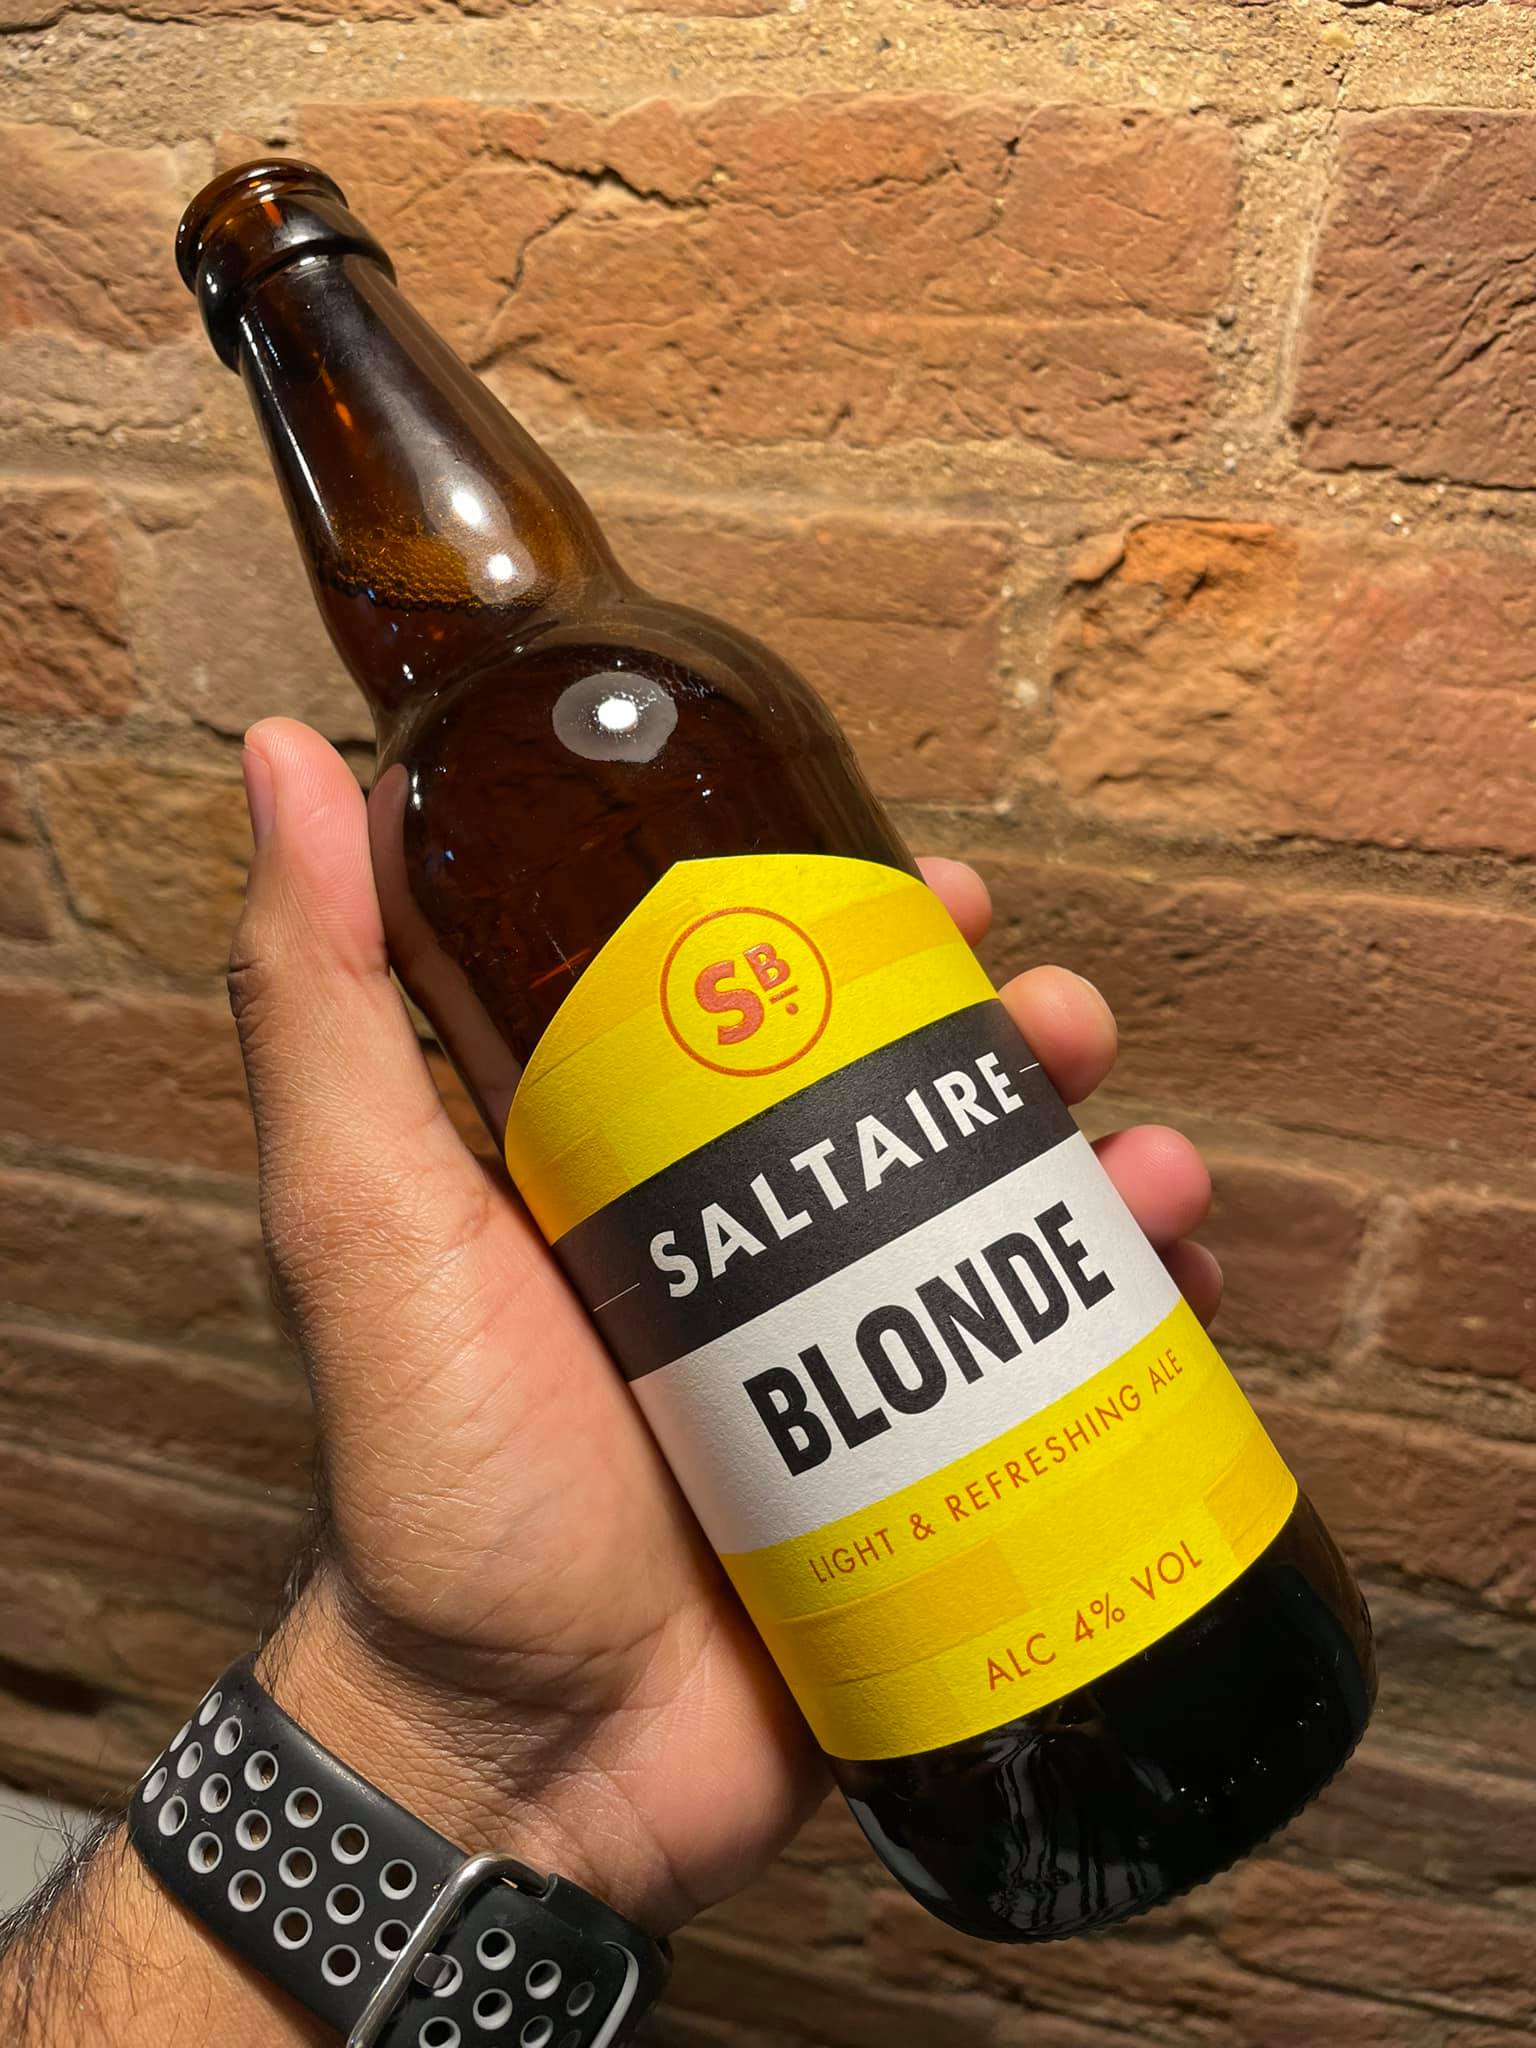 Saltaire Blonde Light and Refreshing Ale
